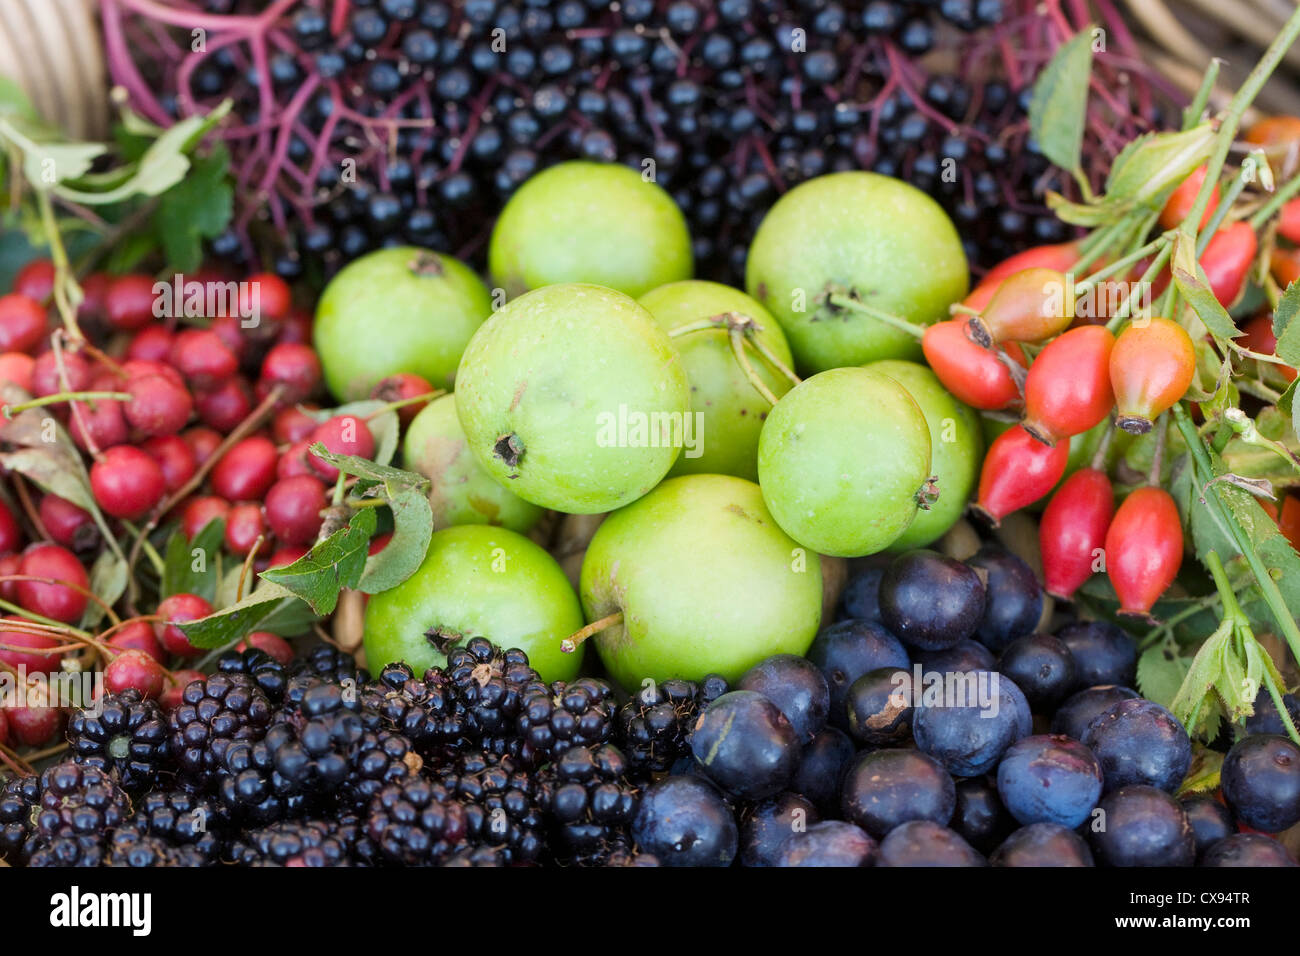 Fruits collected from the hedgerow in a basket. Stock Photo